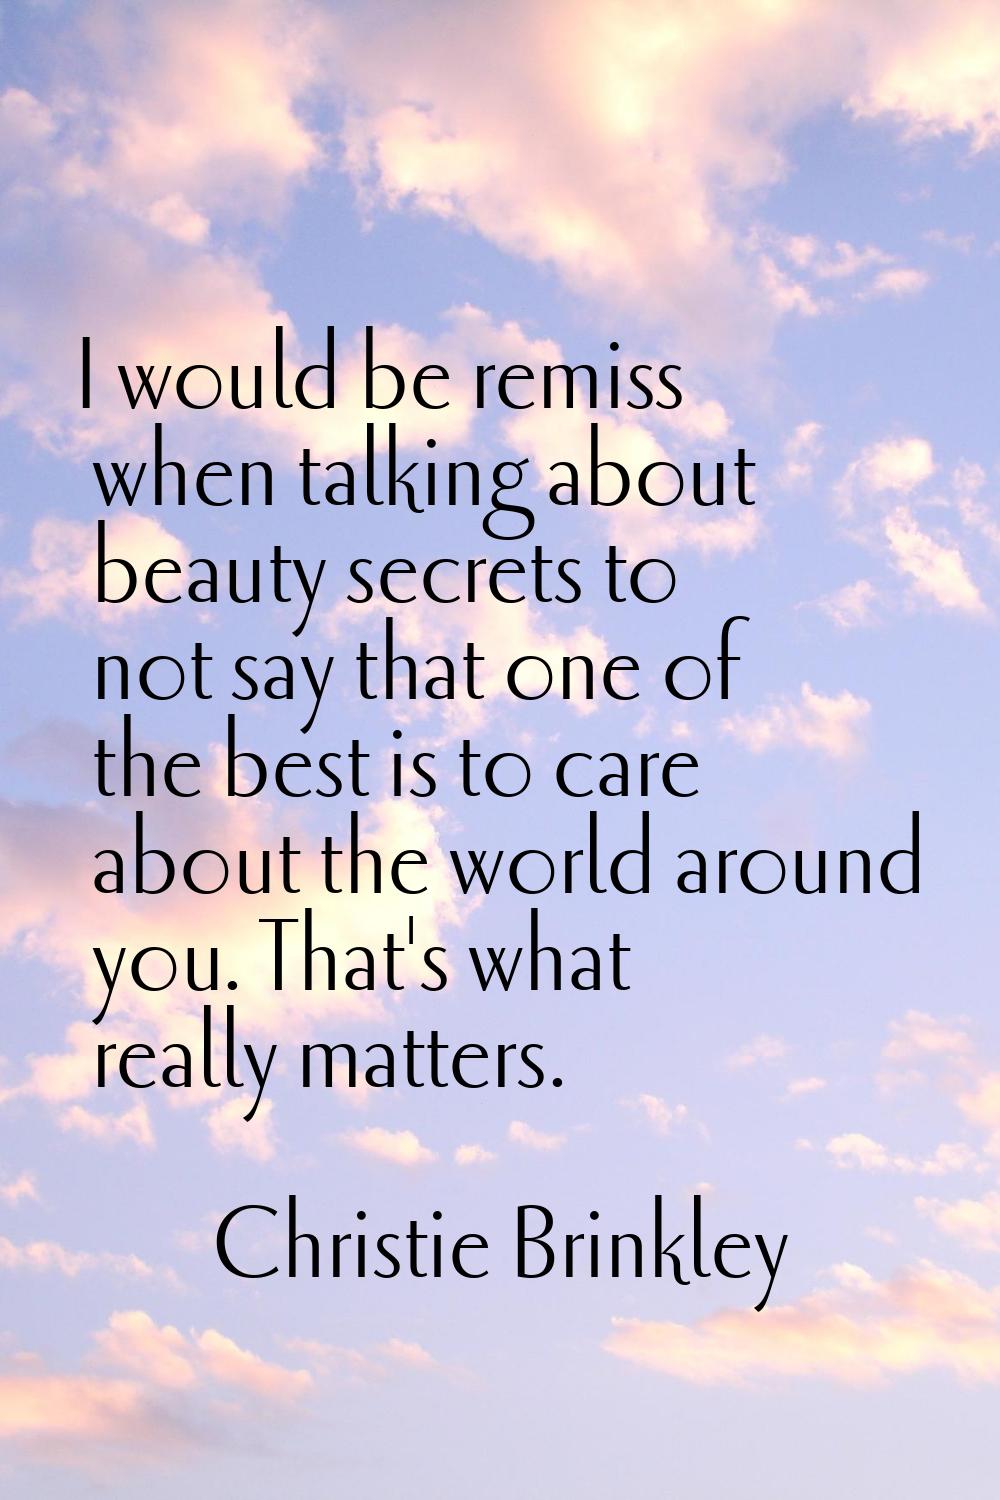 I would be remiss when talking about beauty secrets to not say that one of the best is to care abou